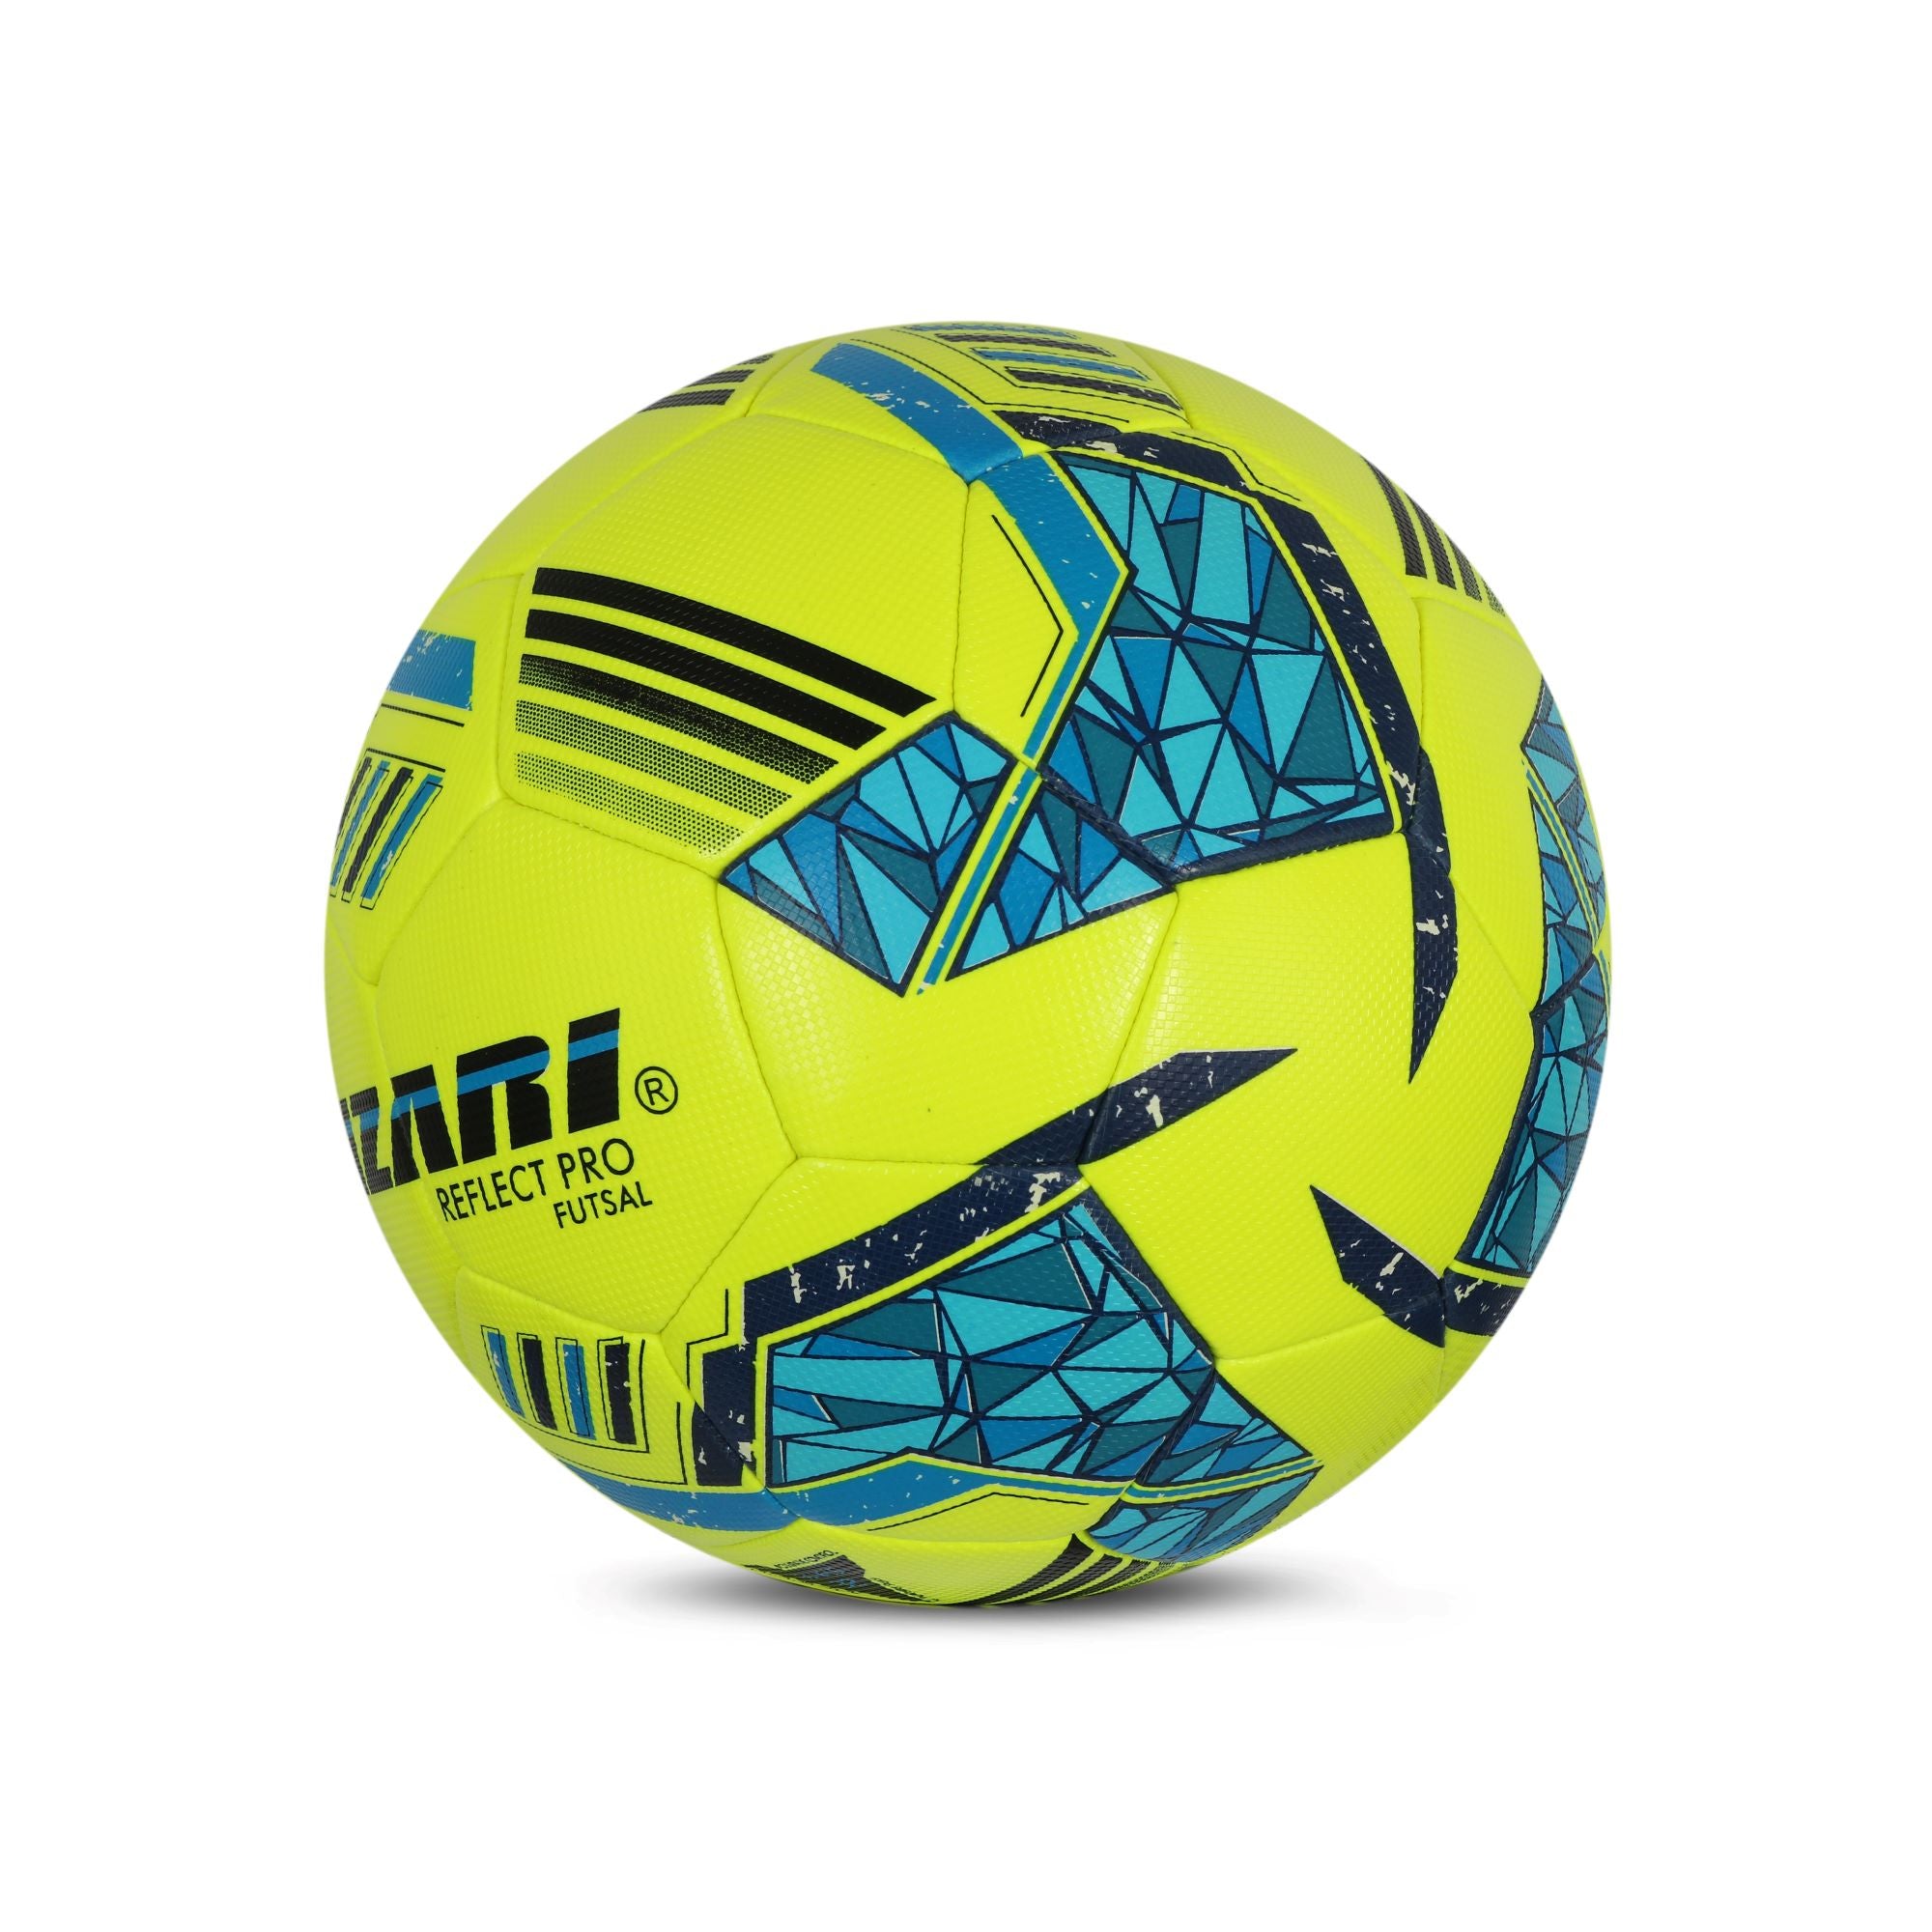 Reflect Pro Premium Indoor Soccer Ball-Lime Yellow